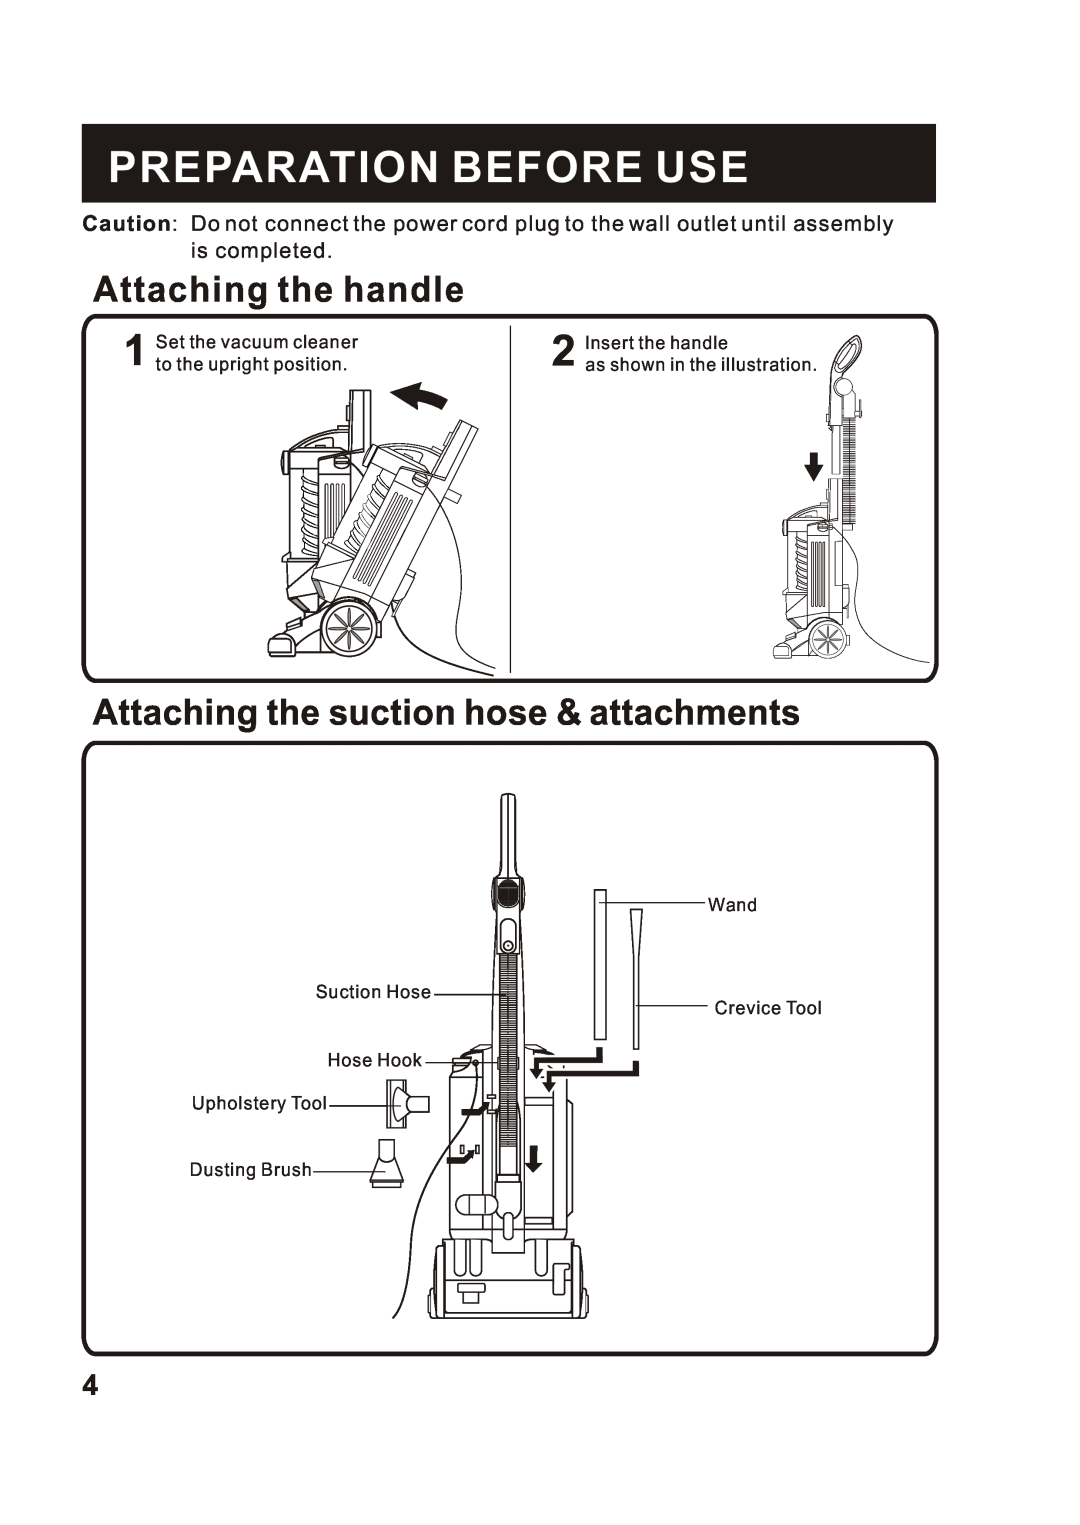 Fantom Vacuum FM780 Preparation Before Use, Attaching the handle, Attaching the suction hose & attachments, is completed 